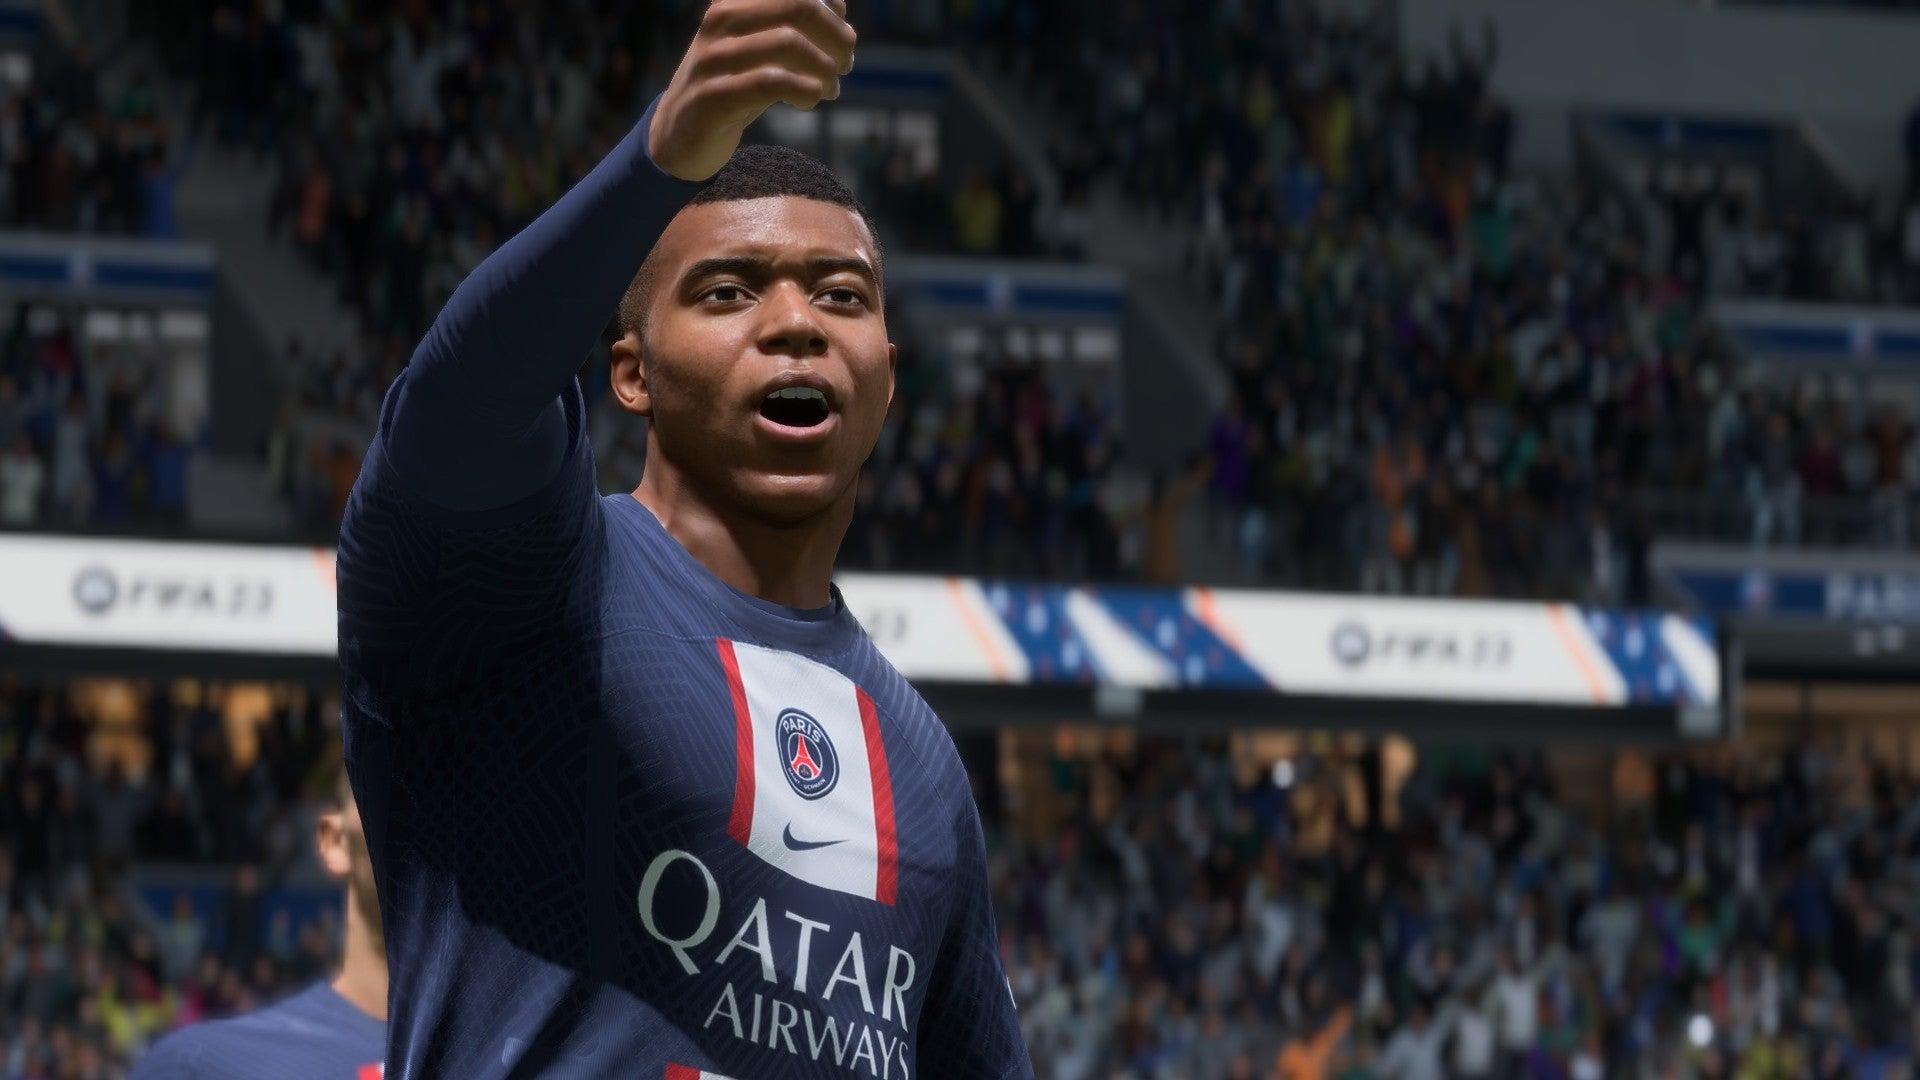 Mbappe cheering at the crowd after scoring a goal in FIFA 23.